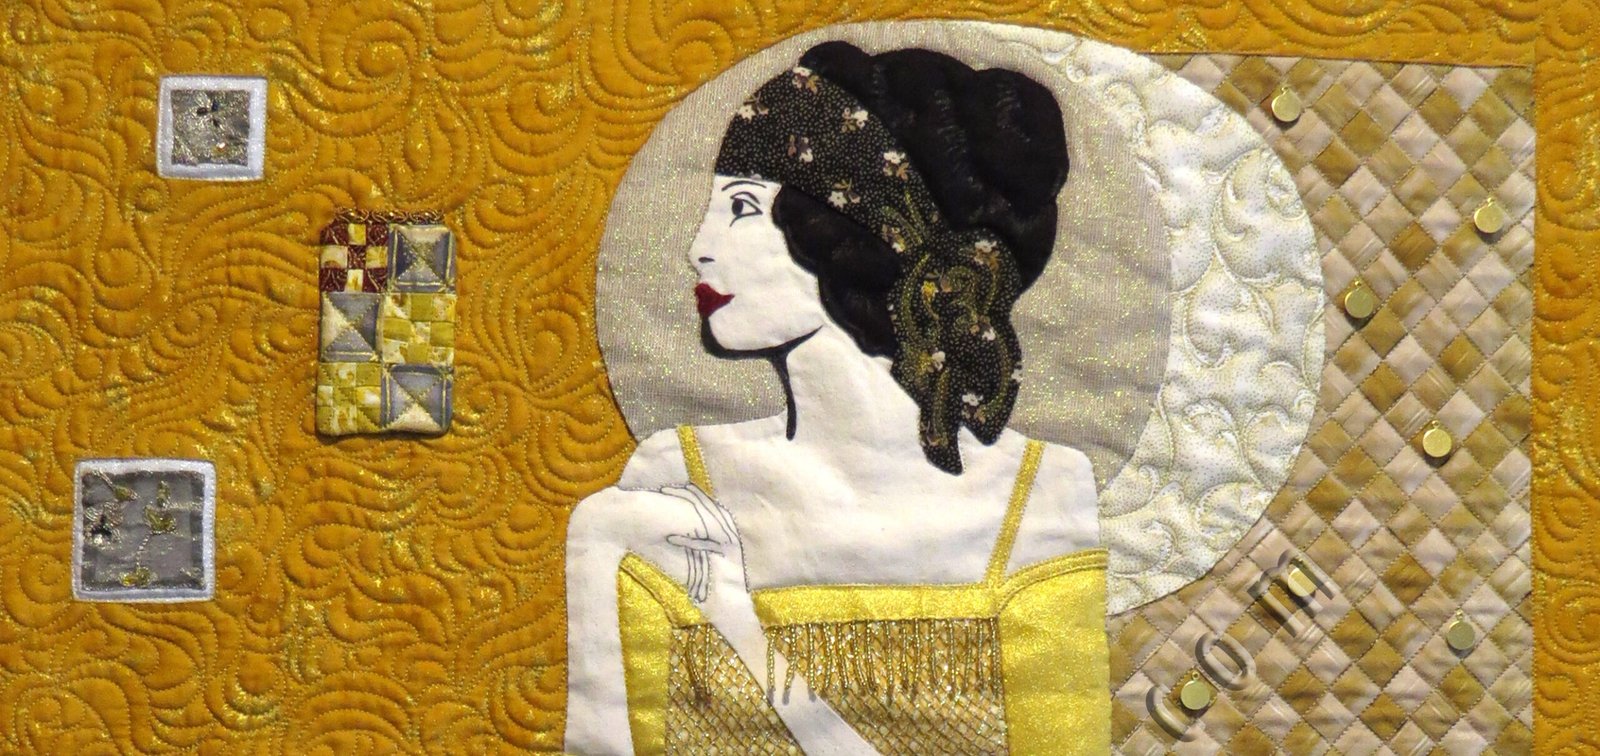 Quilter in Gold